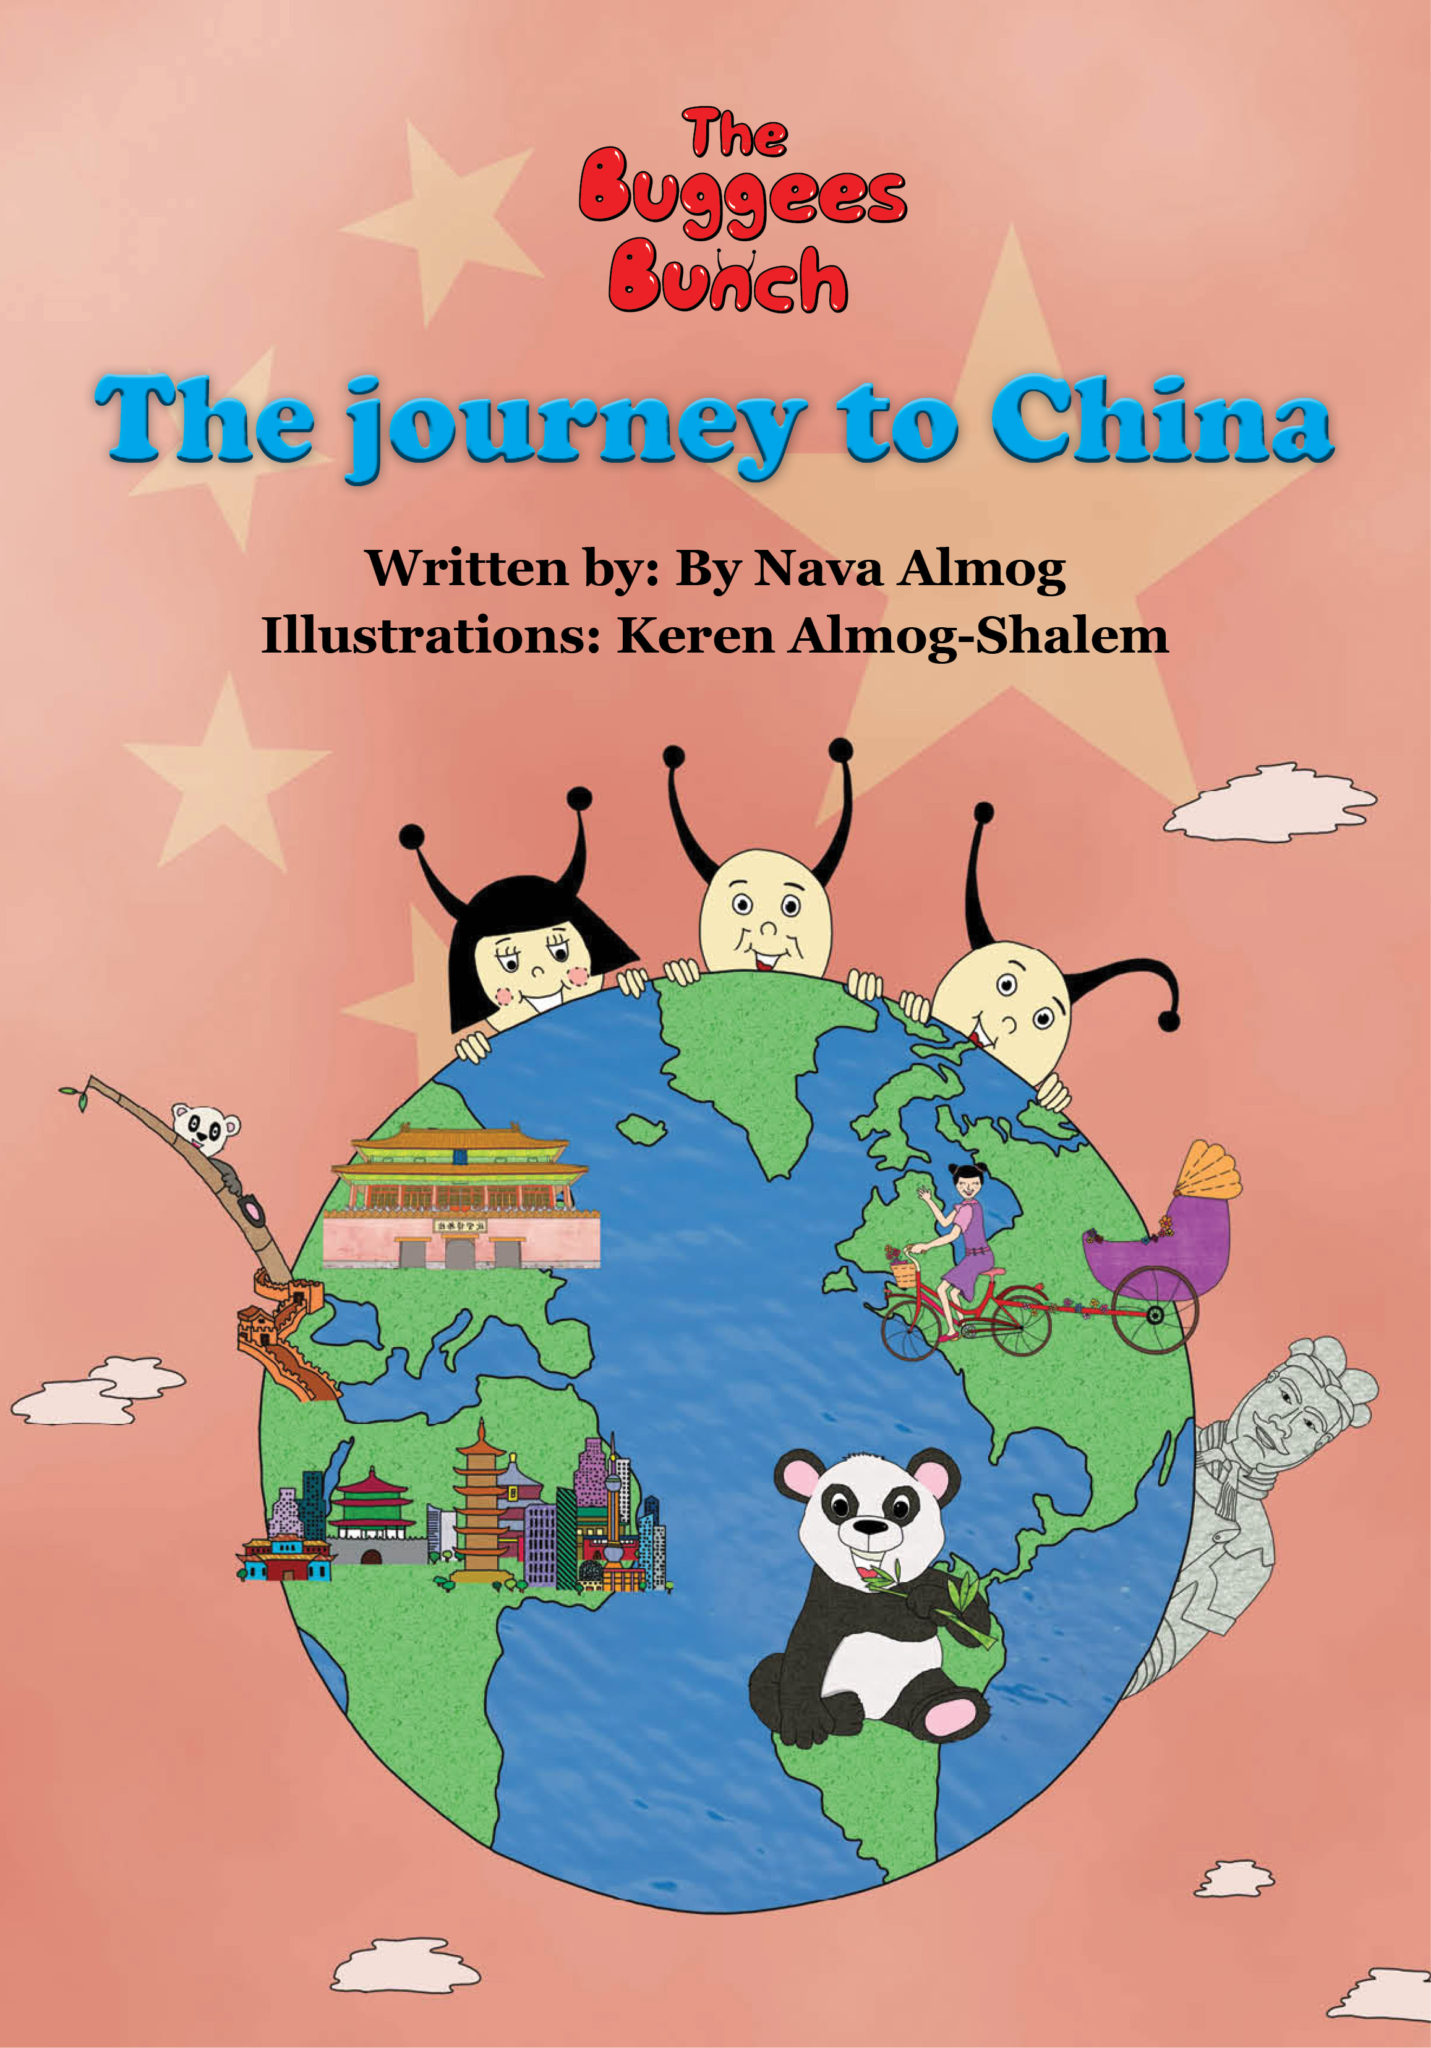 FREE: Children’s book: The journey to China by Nava Almog